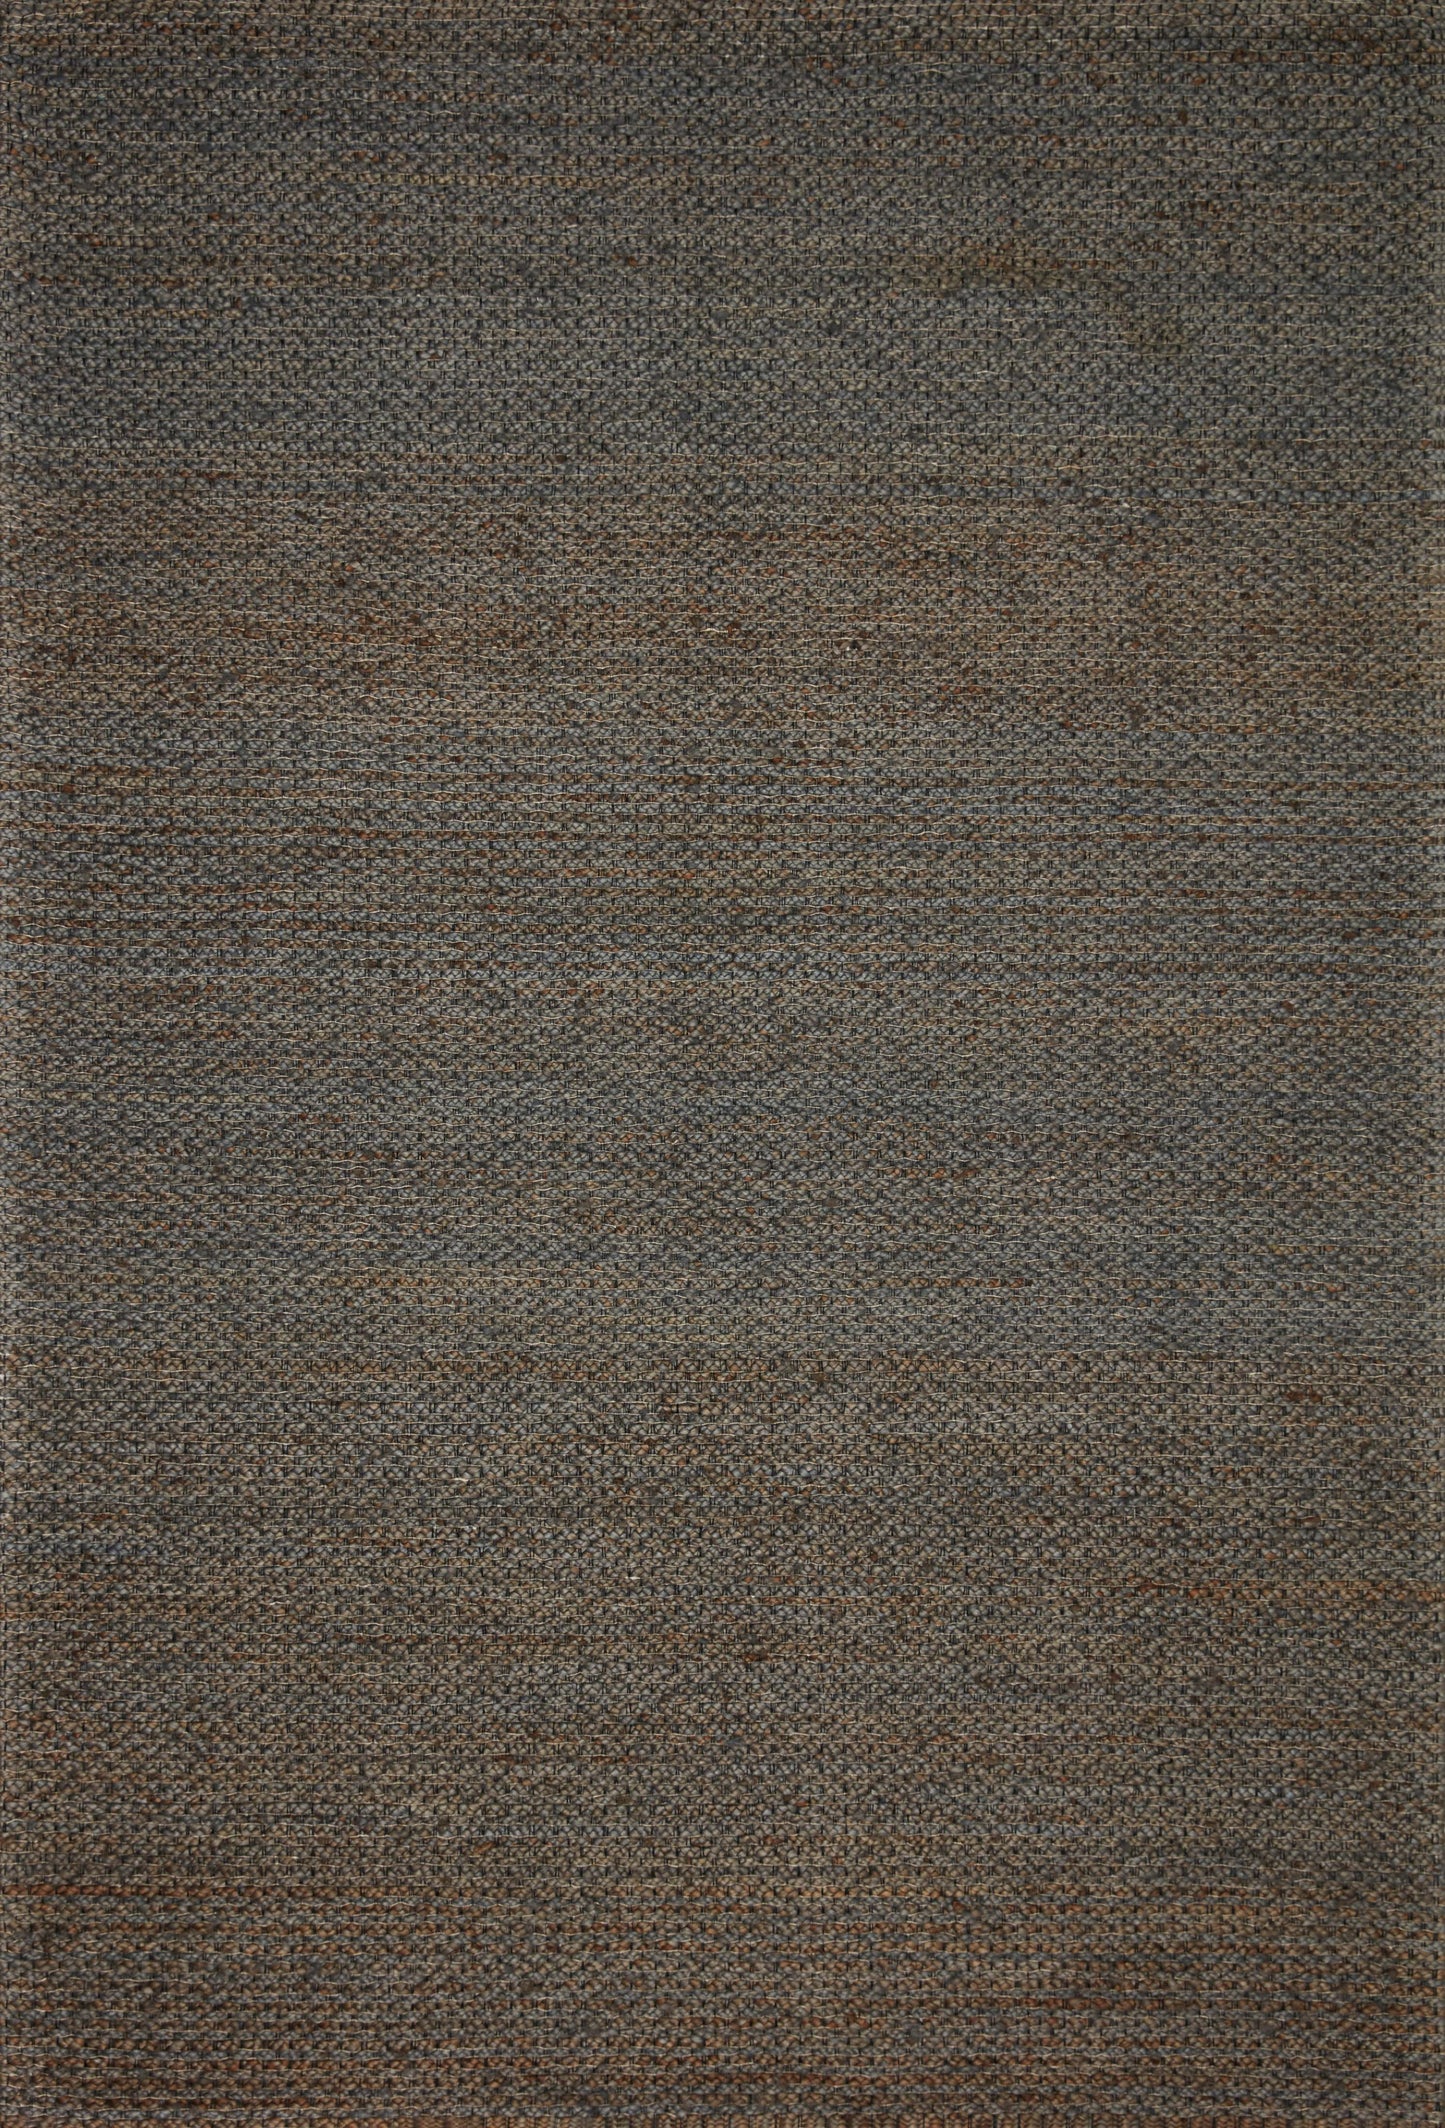 Lily ED Cotton Indoor Area Rug from Loloi